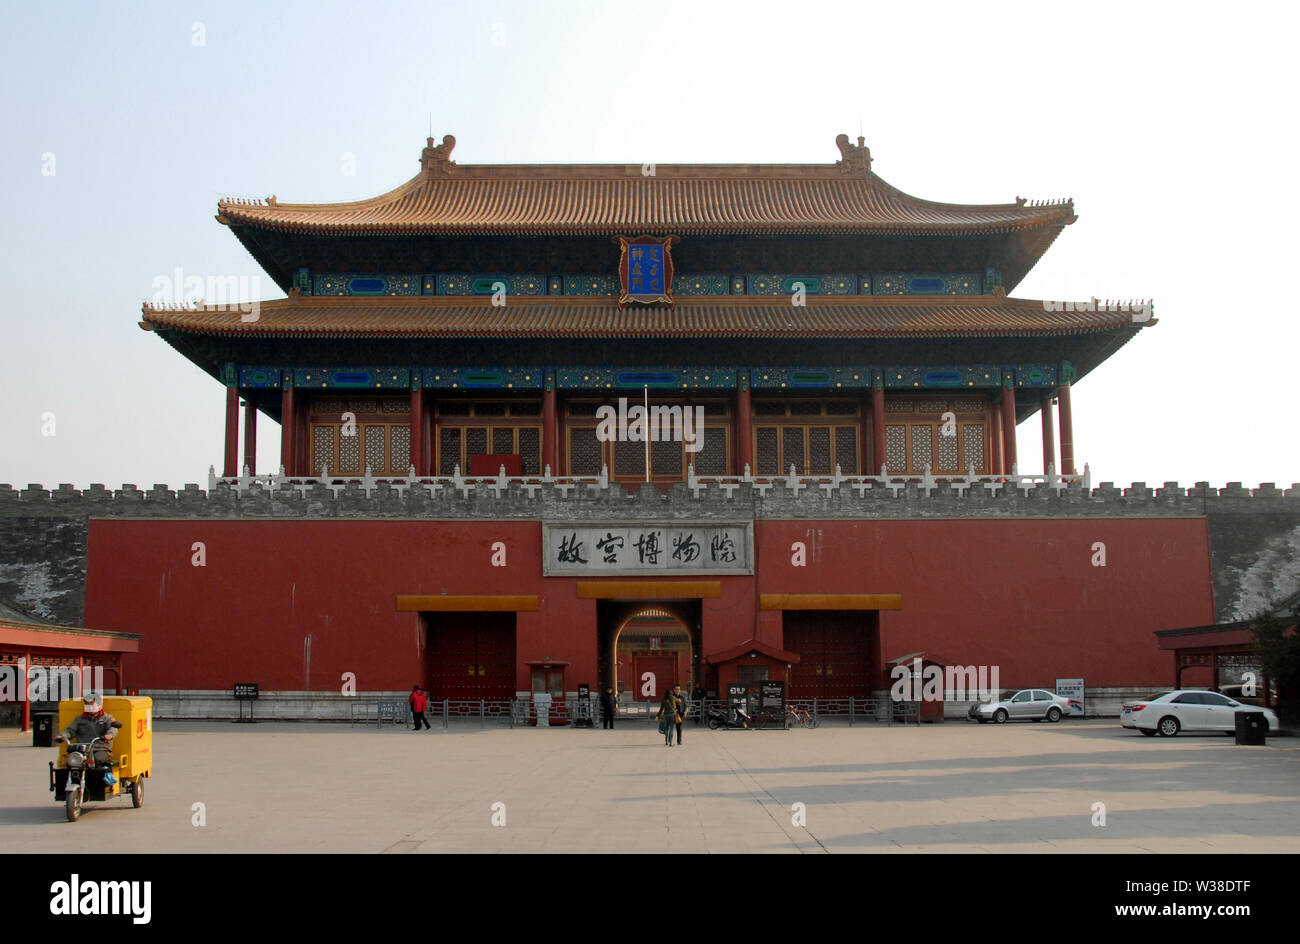 Forbidden City, Beijing, China. This is the Gate of Divine Might, the exit from the site. The Forbidden City has traditional Chinese architecture. Stock Photo